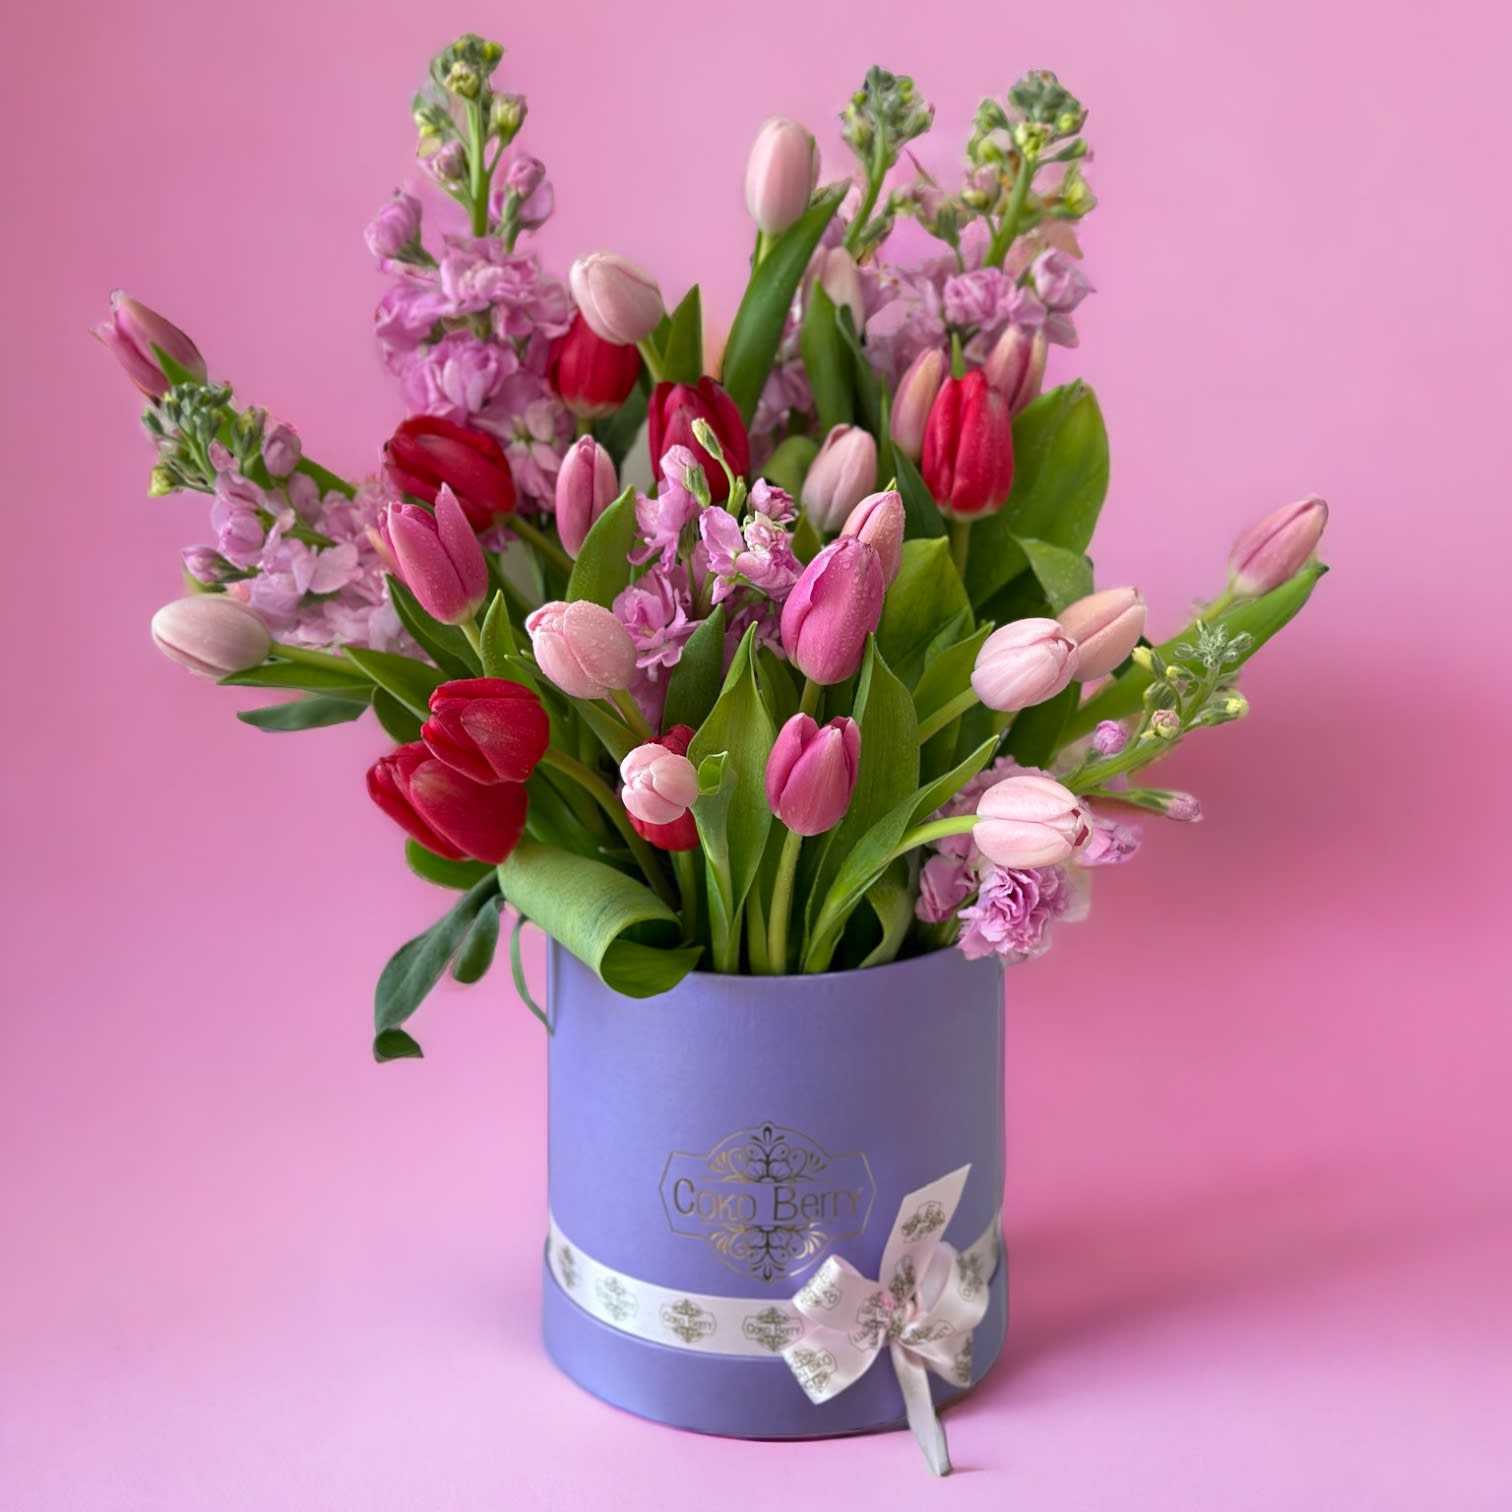 Magic Tulips and Stock - 25 to 30 fresh tulips and Stock flowers in a box (Colors vary according to availability) Flowers 360 degrees box. Ribbon. Care instructions. Custom greeting card.